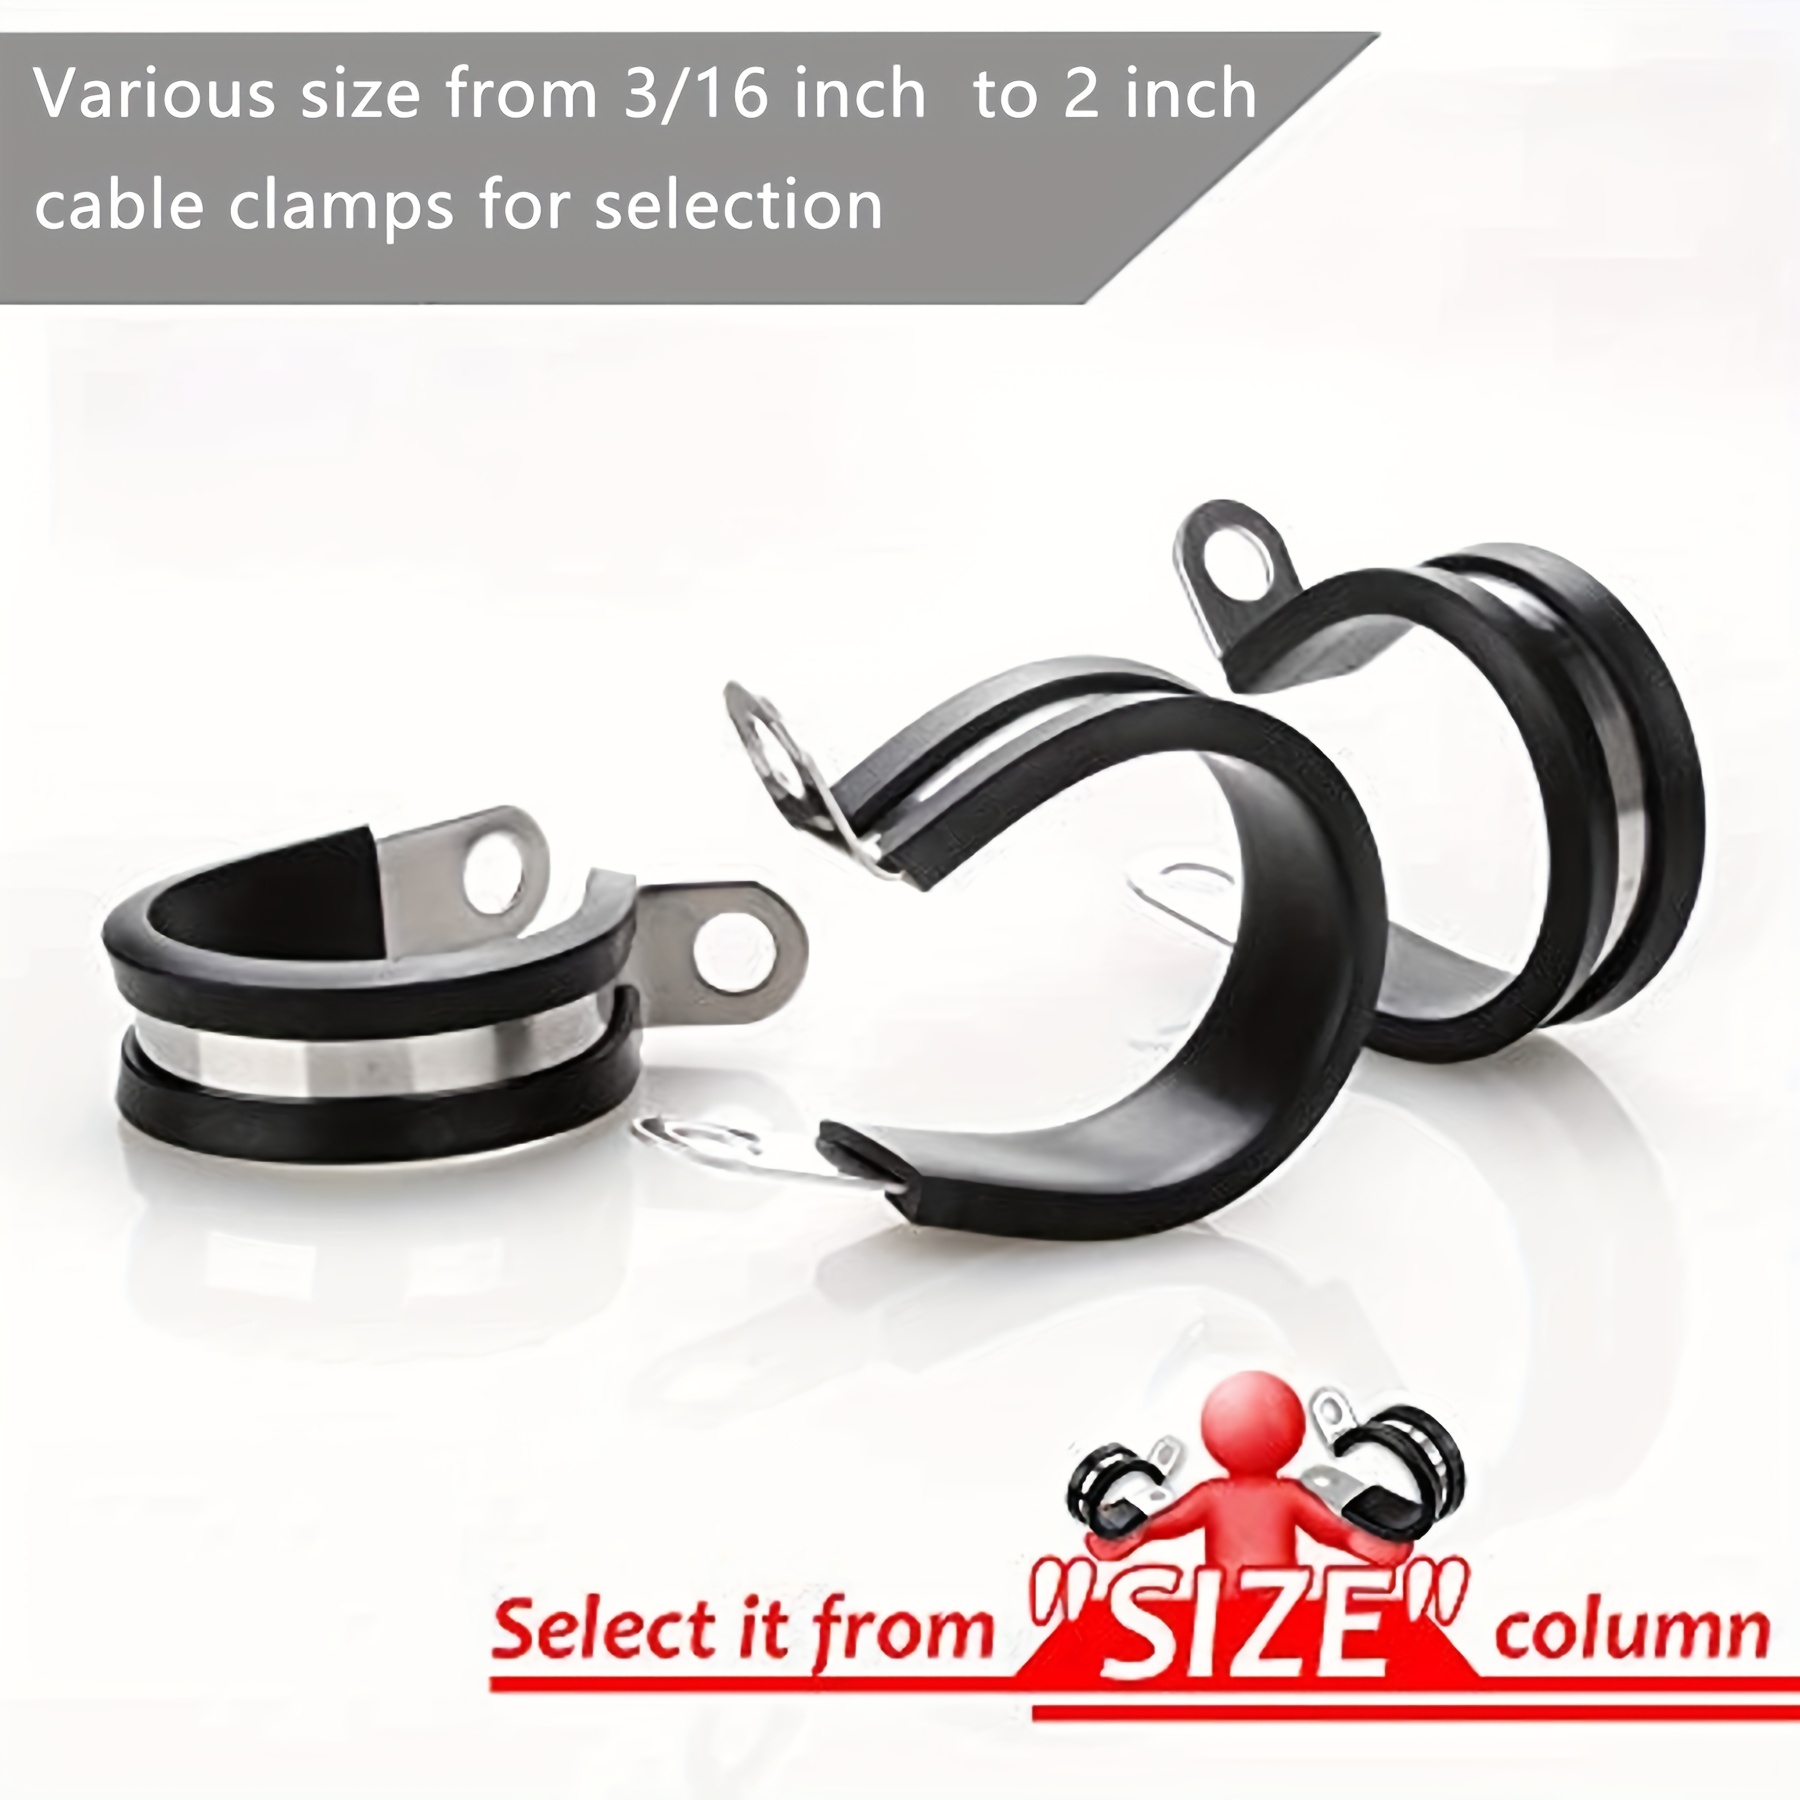 Silicone edge protector with clamping strap for different clamping